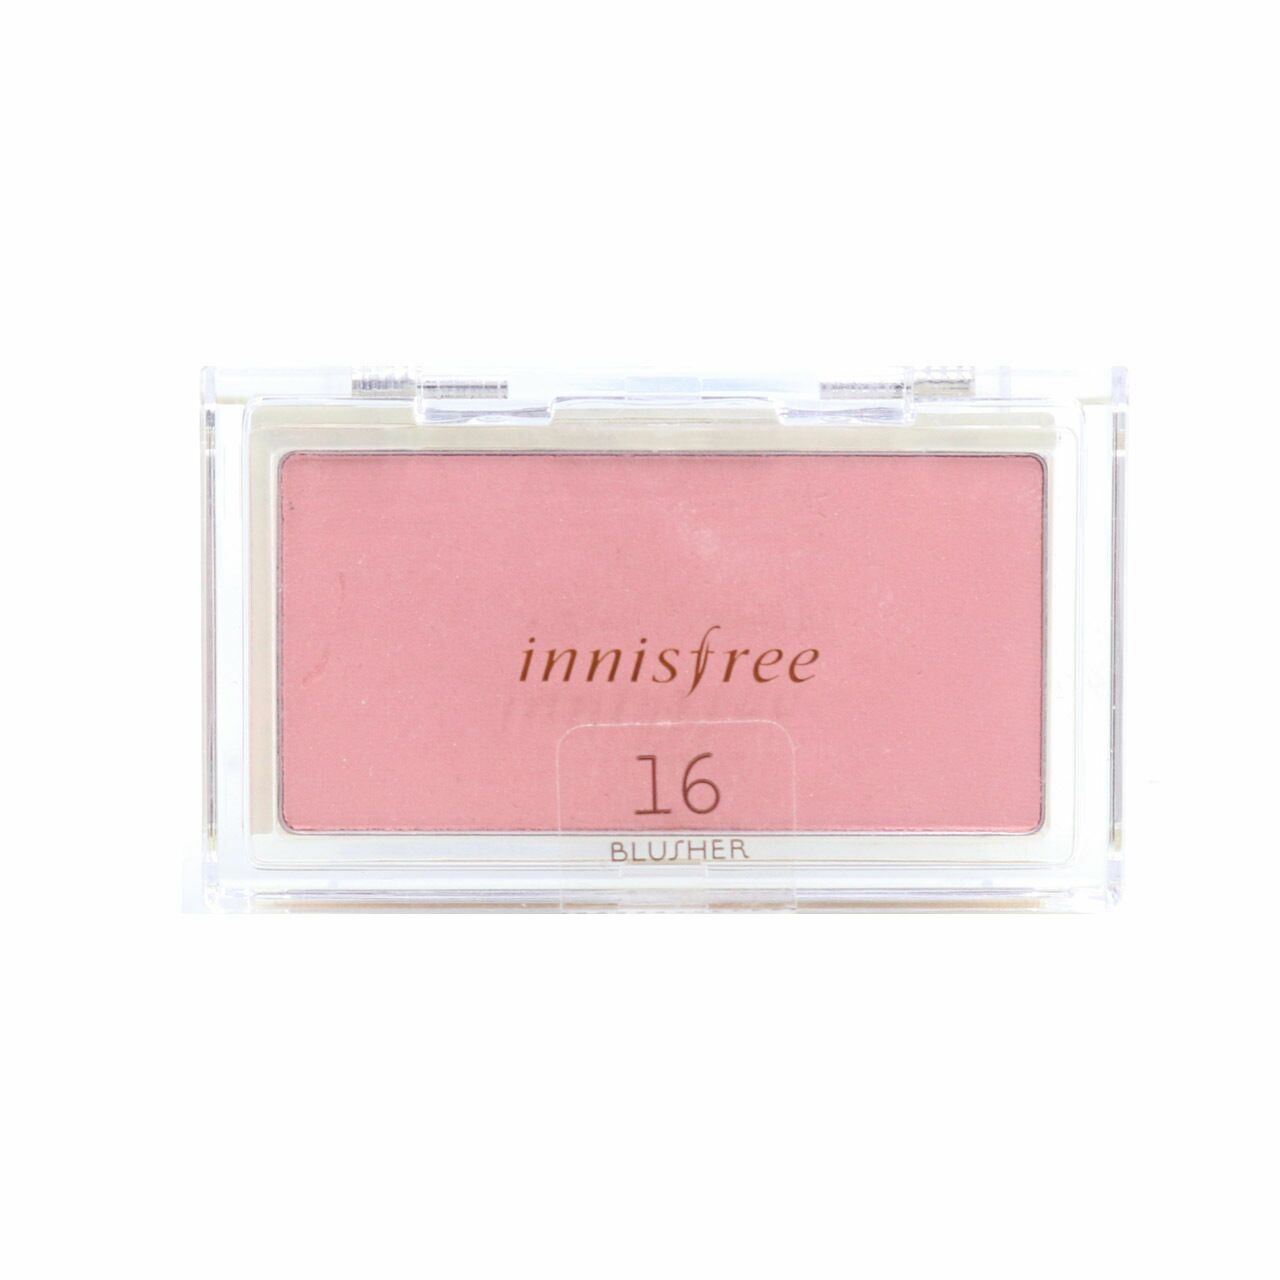 Innisfree 16 Blusher Faces